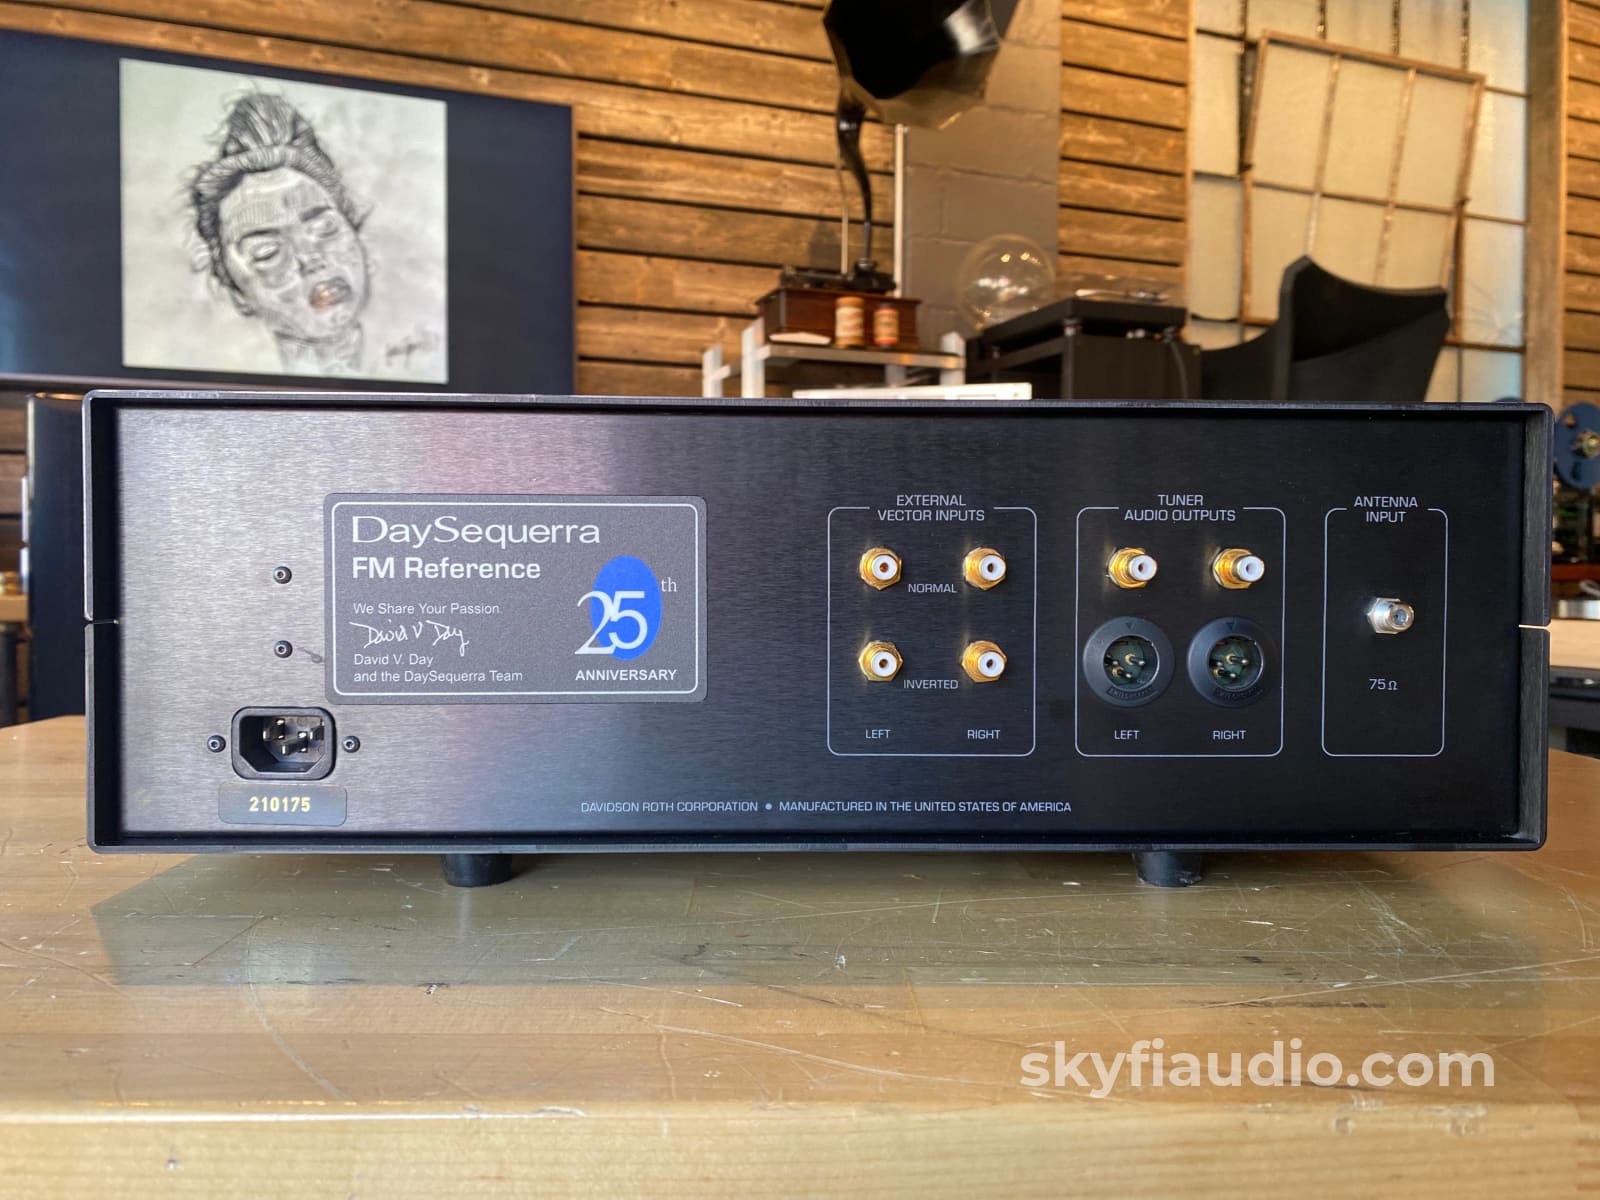 Day Sequerra 25Th Anniversary Fm Reference Tuner - The Ultimate